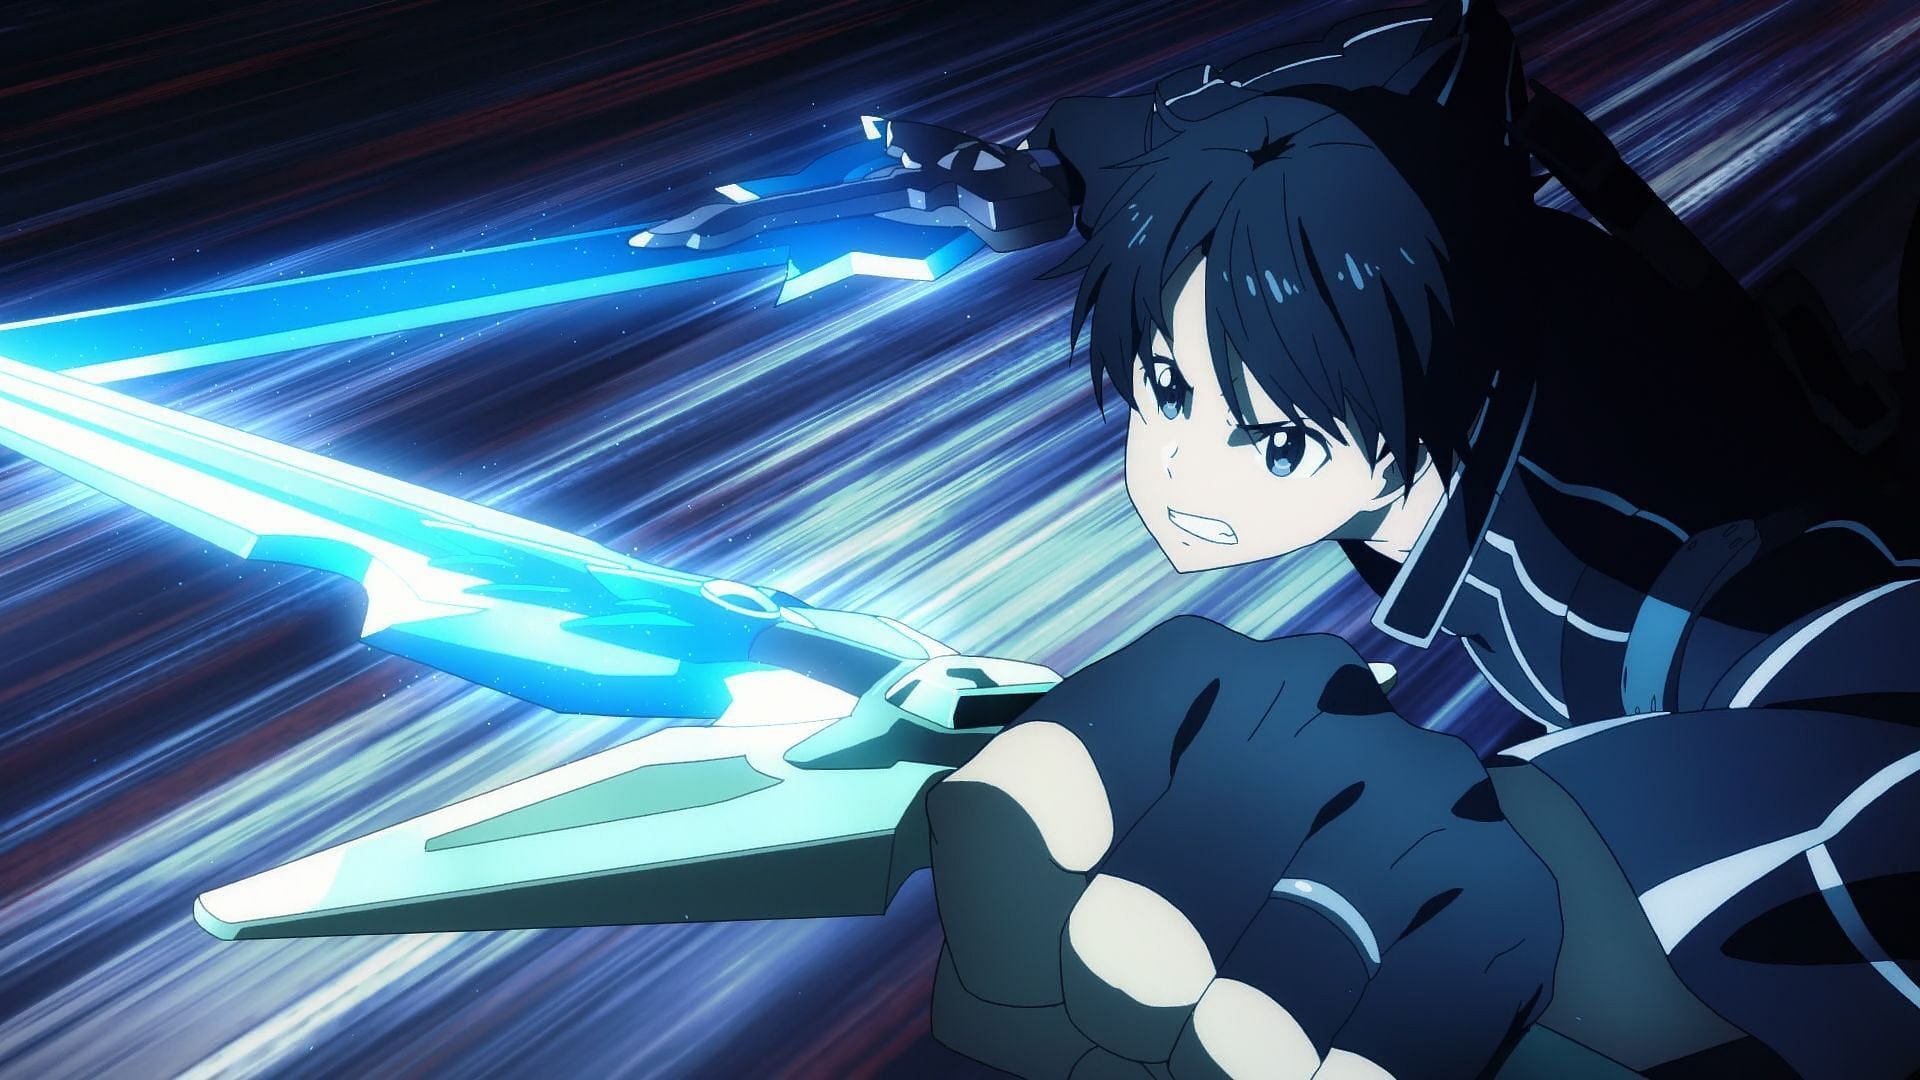 Kirito from Sword Art Online (Image via A-1 Pictures)